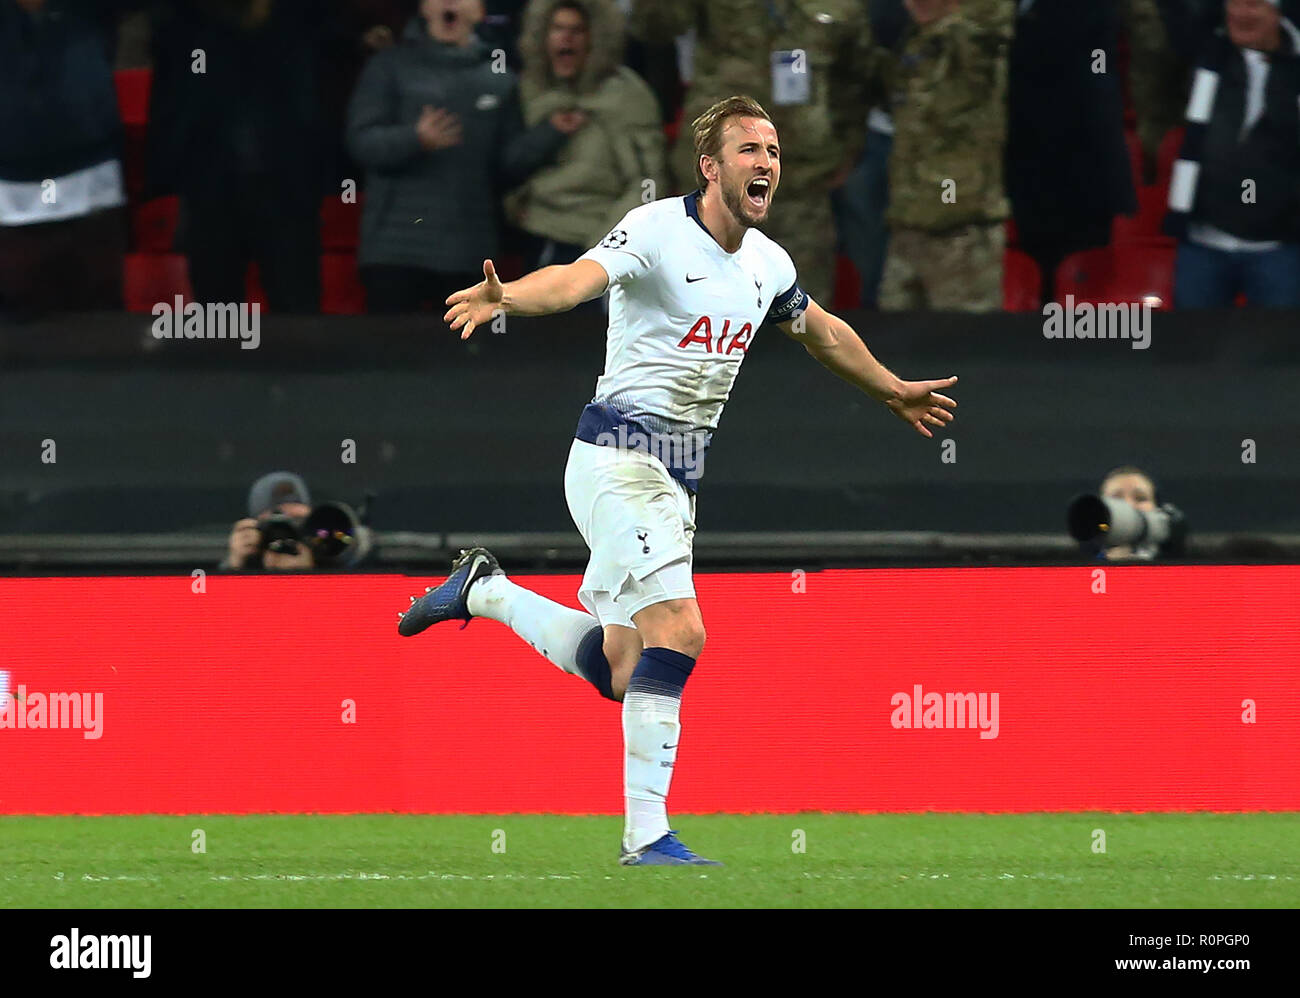 London, England, 06th November 2018.  Tottenham Hotspur's Harry Kane celebrates his goal during Champion League Group B between Tottenham Hotspur and PSV Eindhoven at Wembley stadium , London, England on 06 Nov 2018. Credit Action Foto Sport  FA Premier League and Football League images are subject to DataCo Licence. Editorial use ONLY. No print sales. No personal use sales. NO UNPAID USE Credit: Action Foto Sport/Alamy Live News Stock Photo